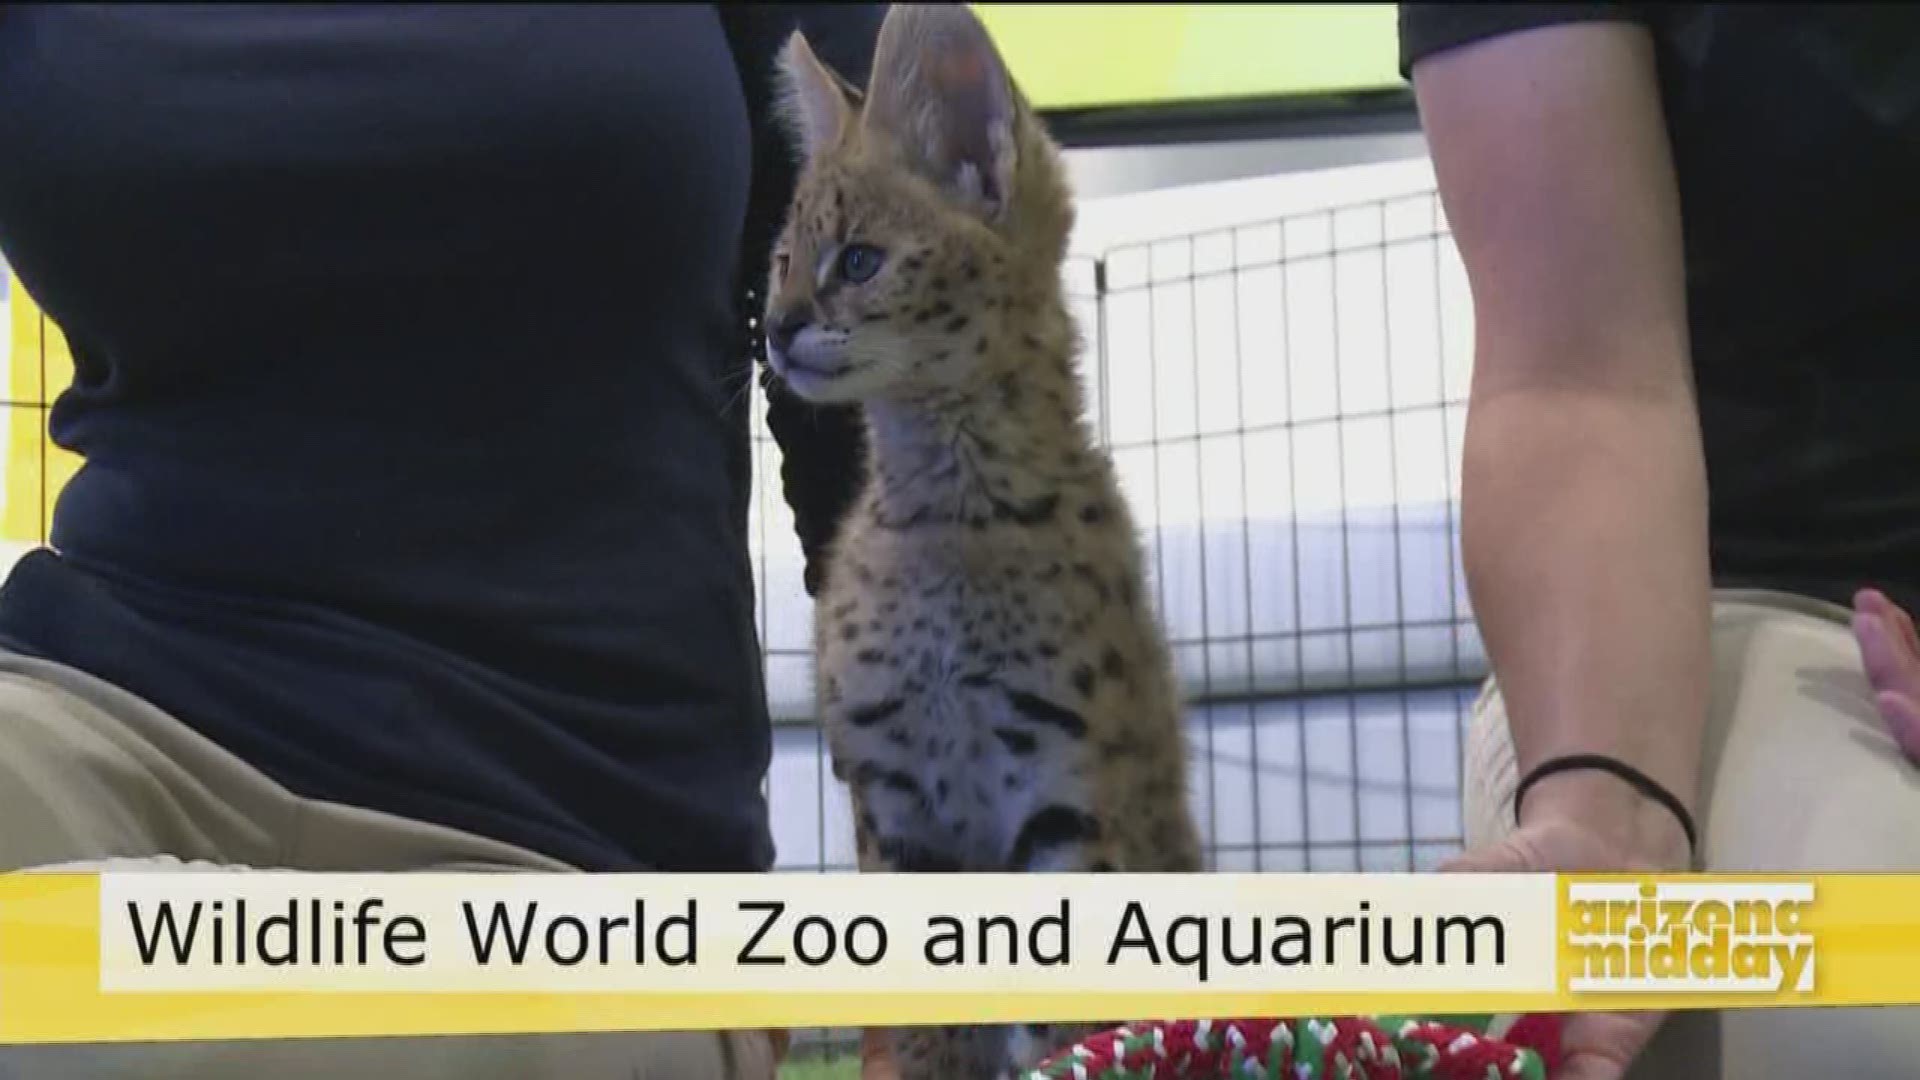 Kristy Morcom from the Wildlife World Zoo and Aquarium introduces us to 2 months old serval kitten.